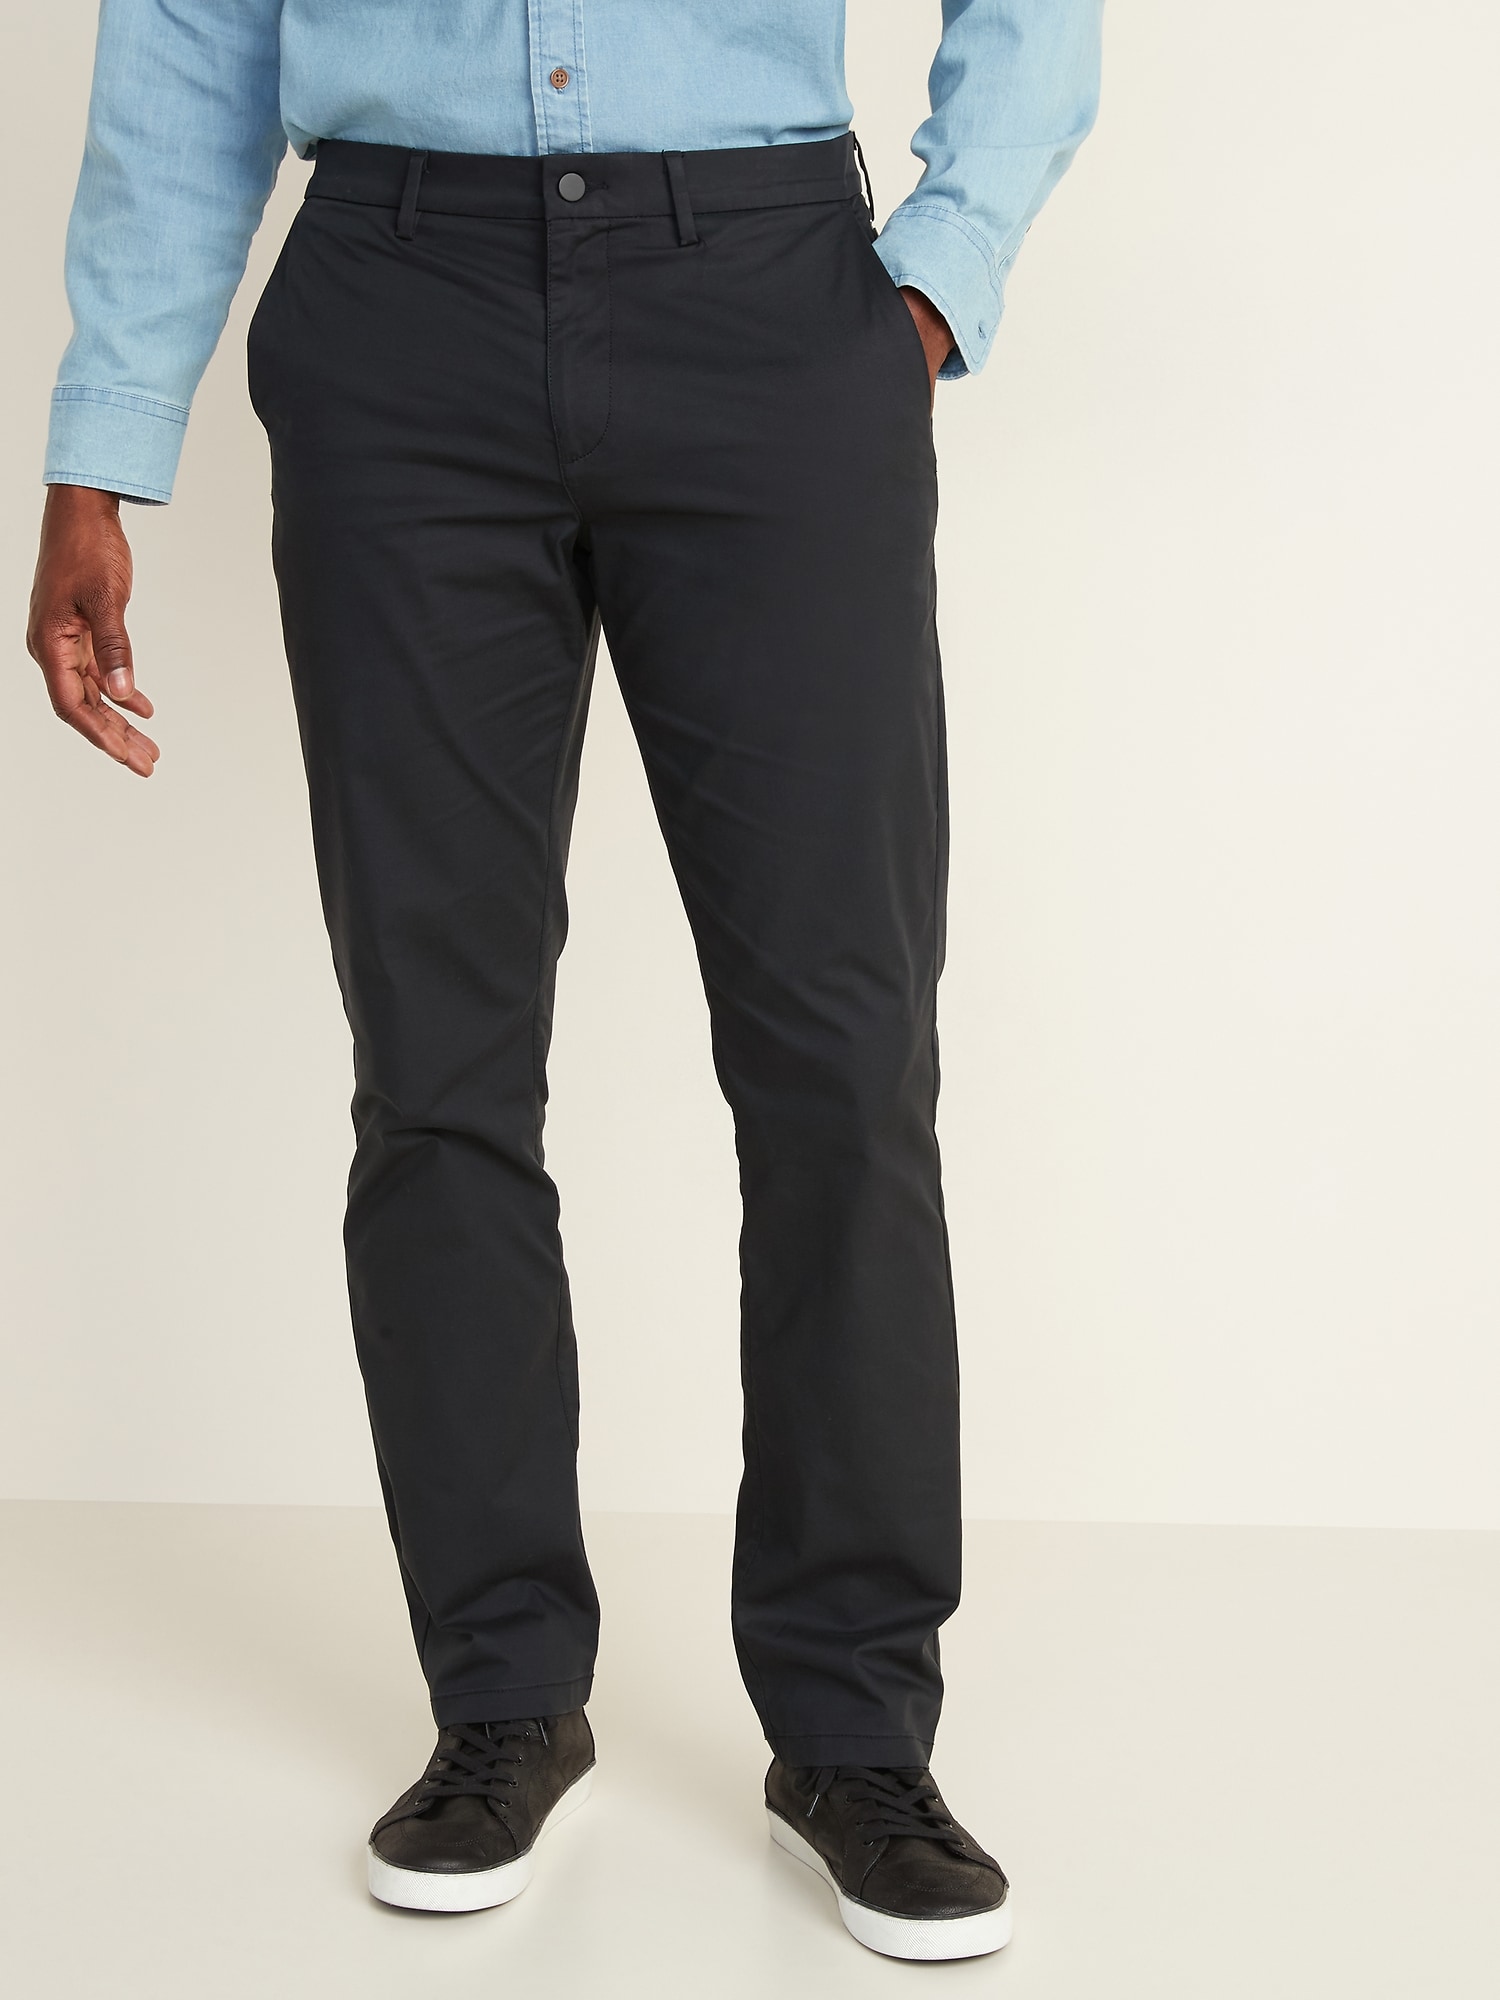 Straight Built-In Flex Ultimate Tech Chino Pants